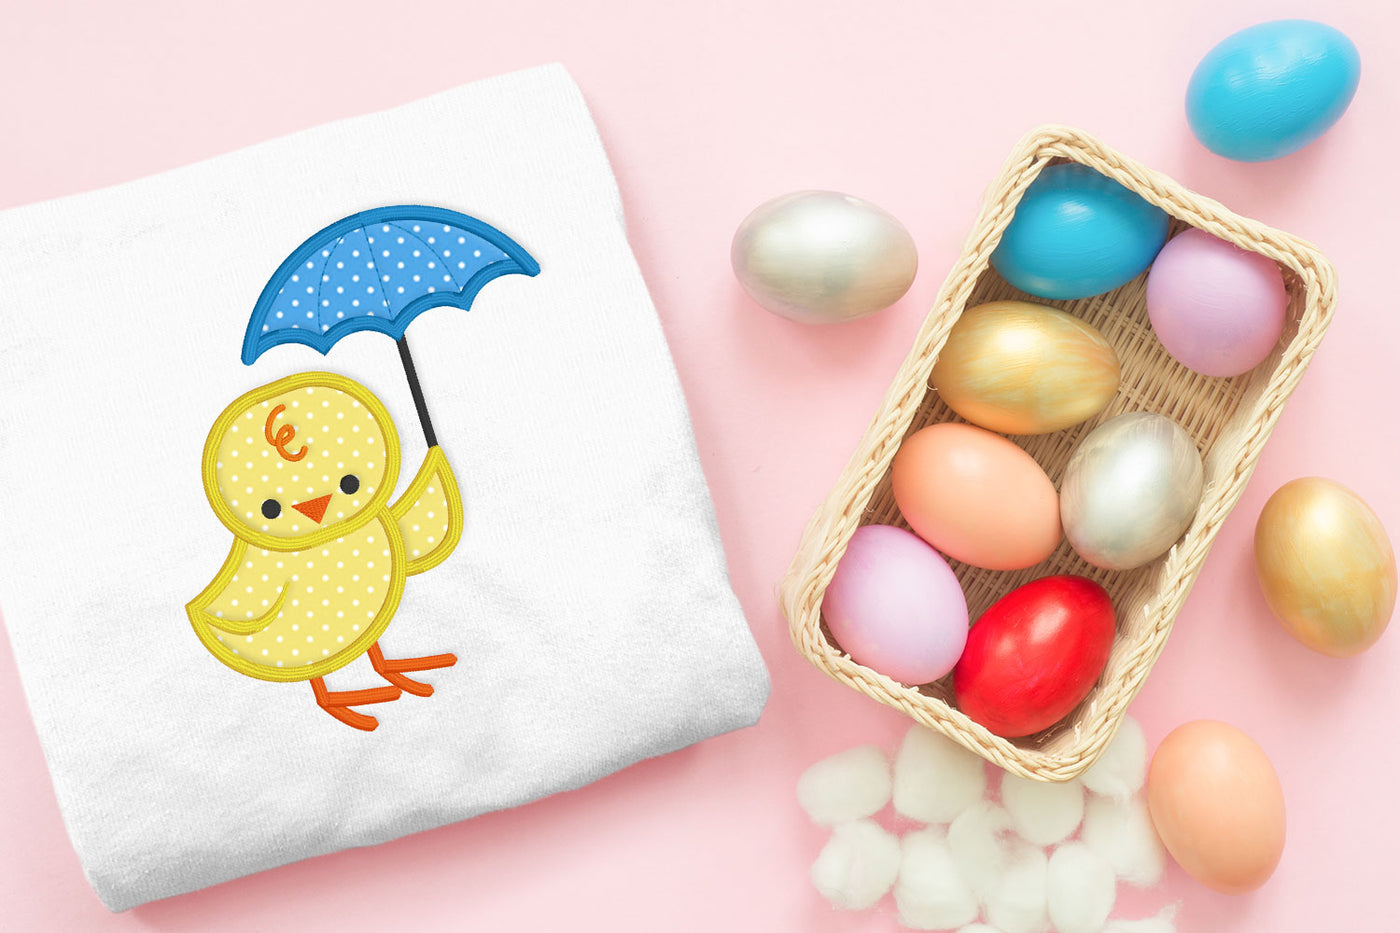 Spring Chick with Umbrella Applique Embroidery